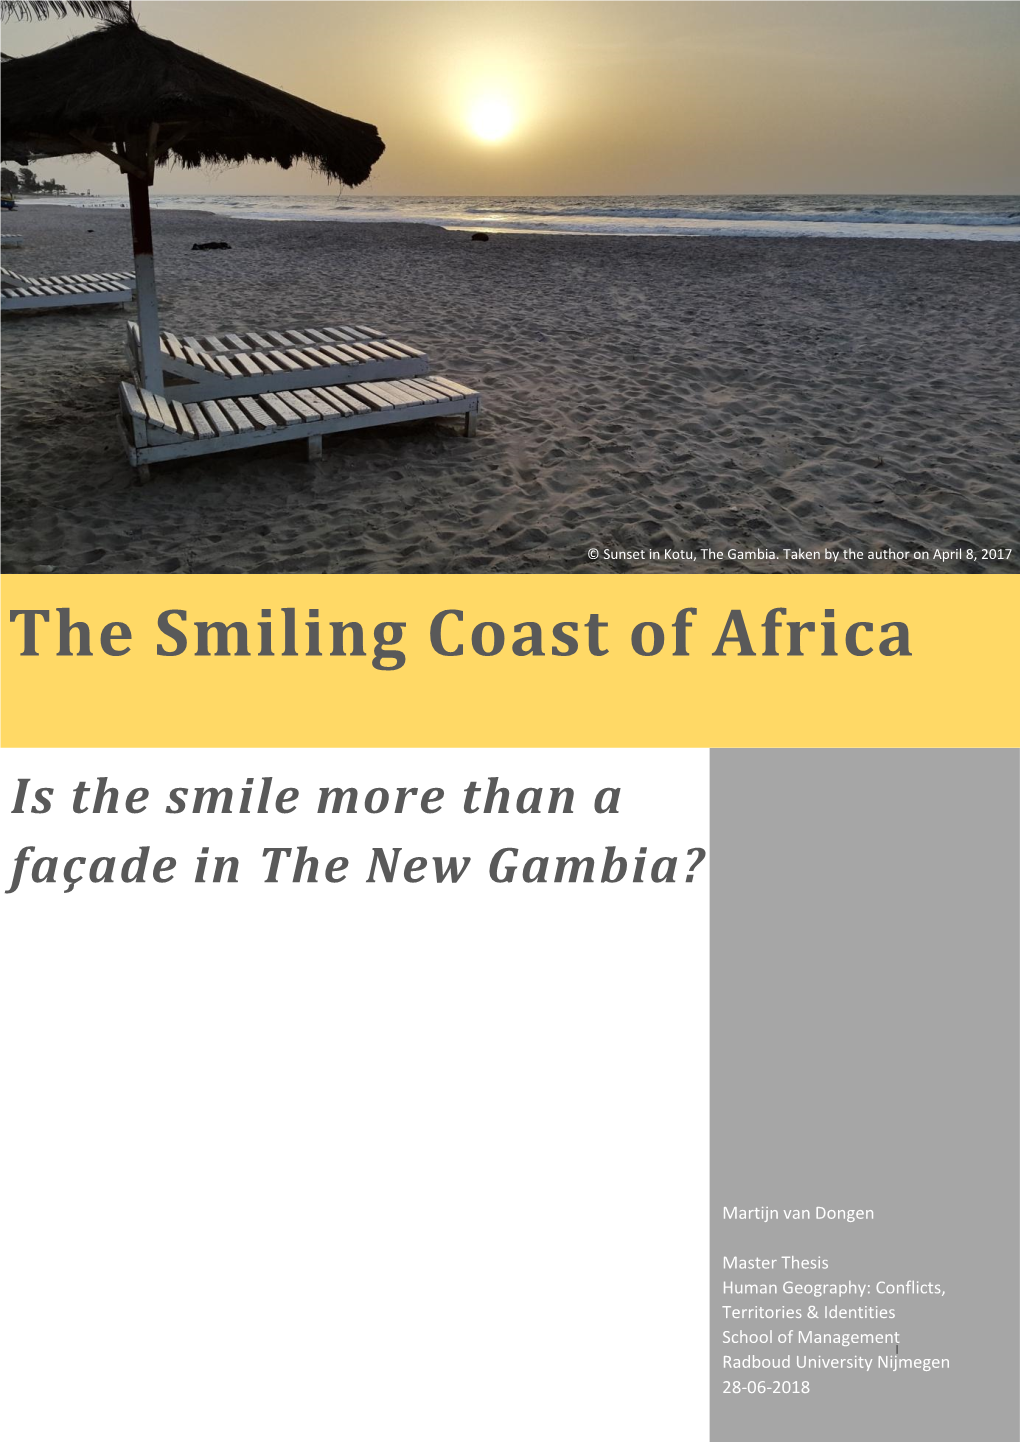 The Smiling Coast of Africa